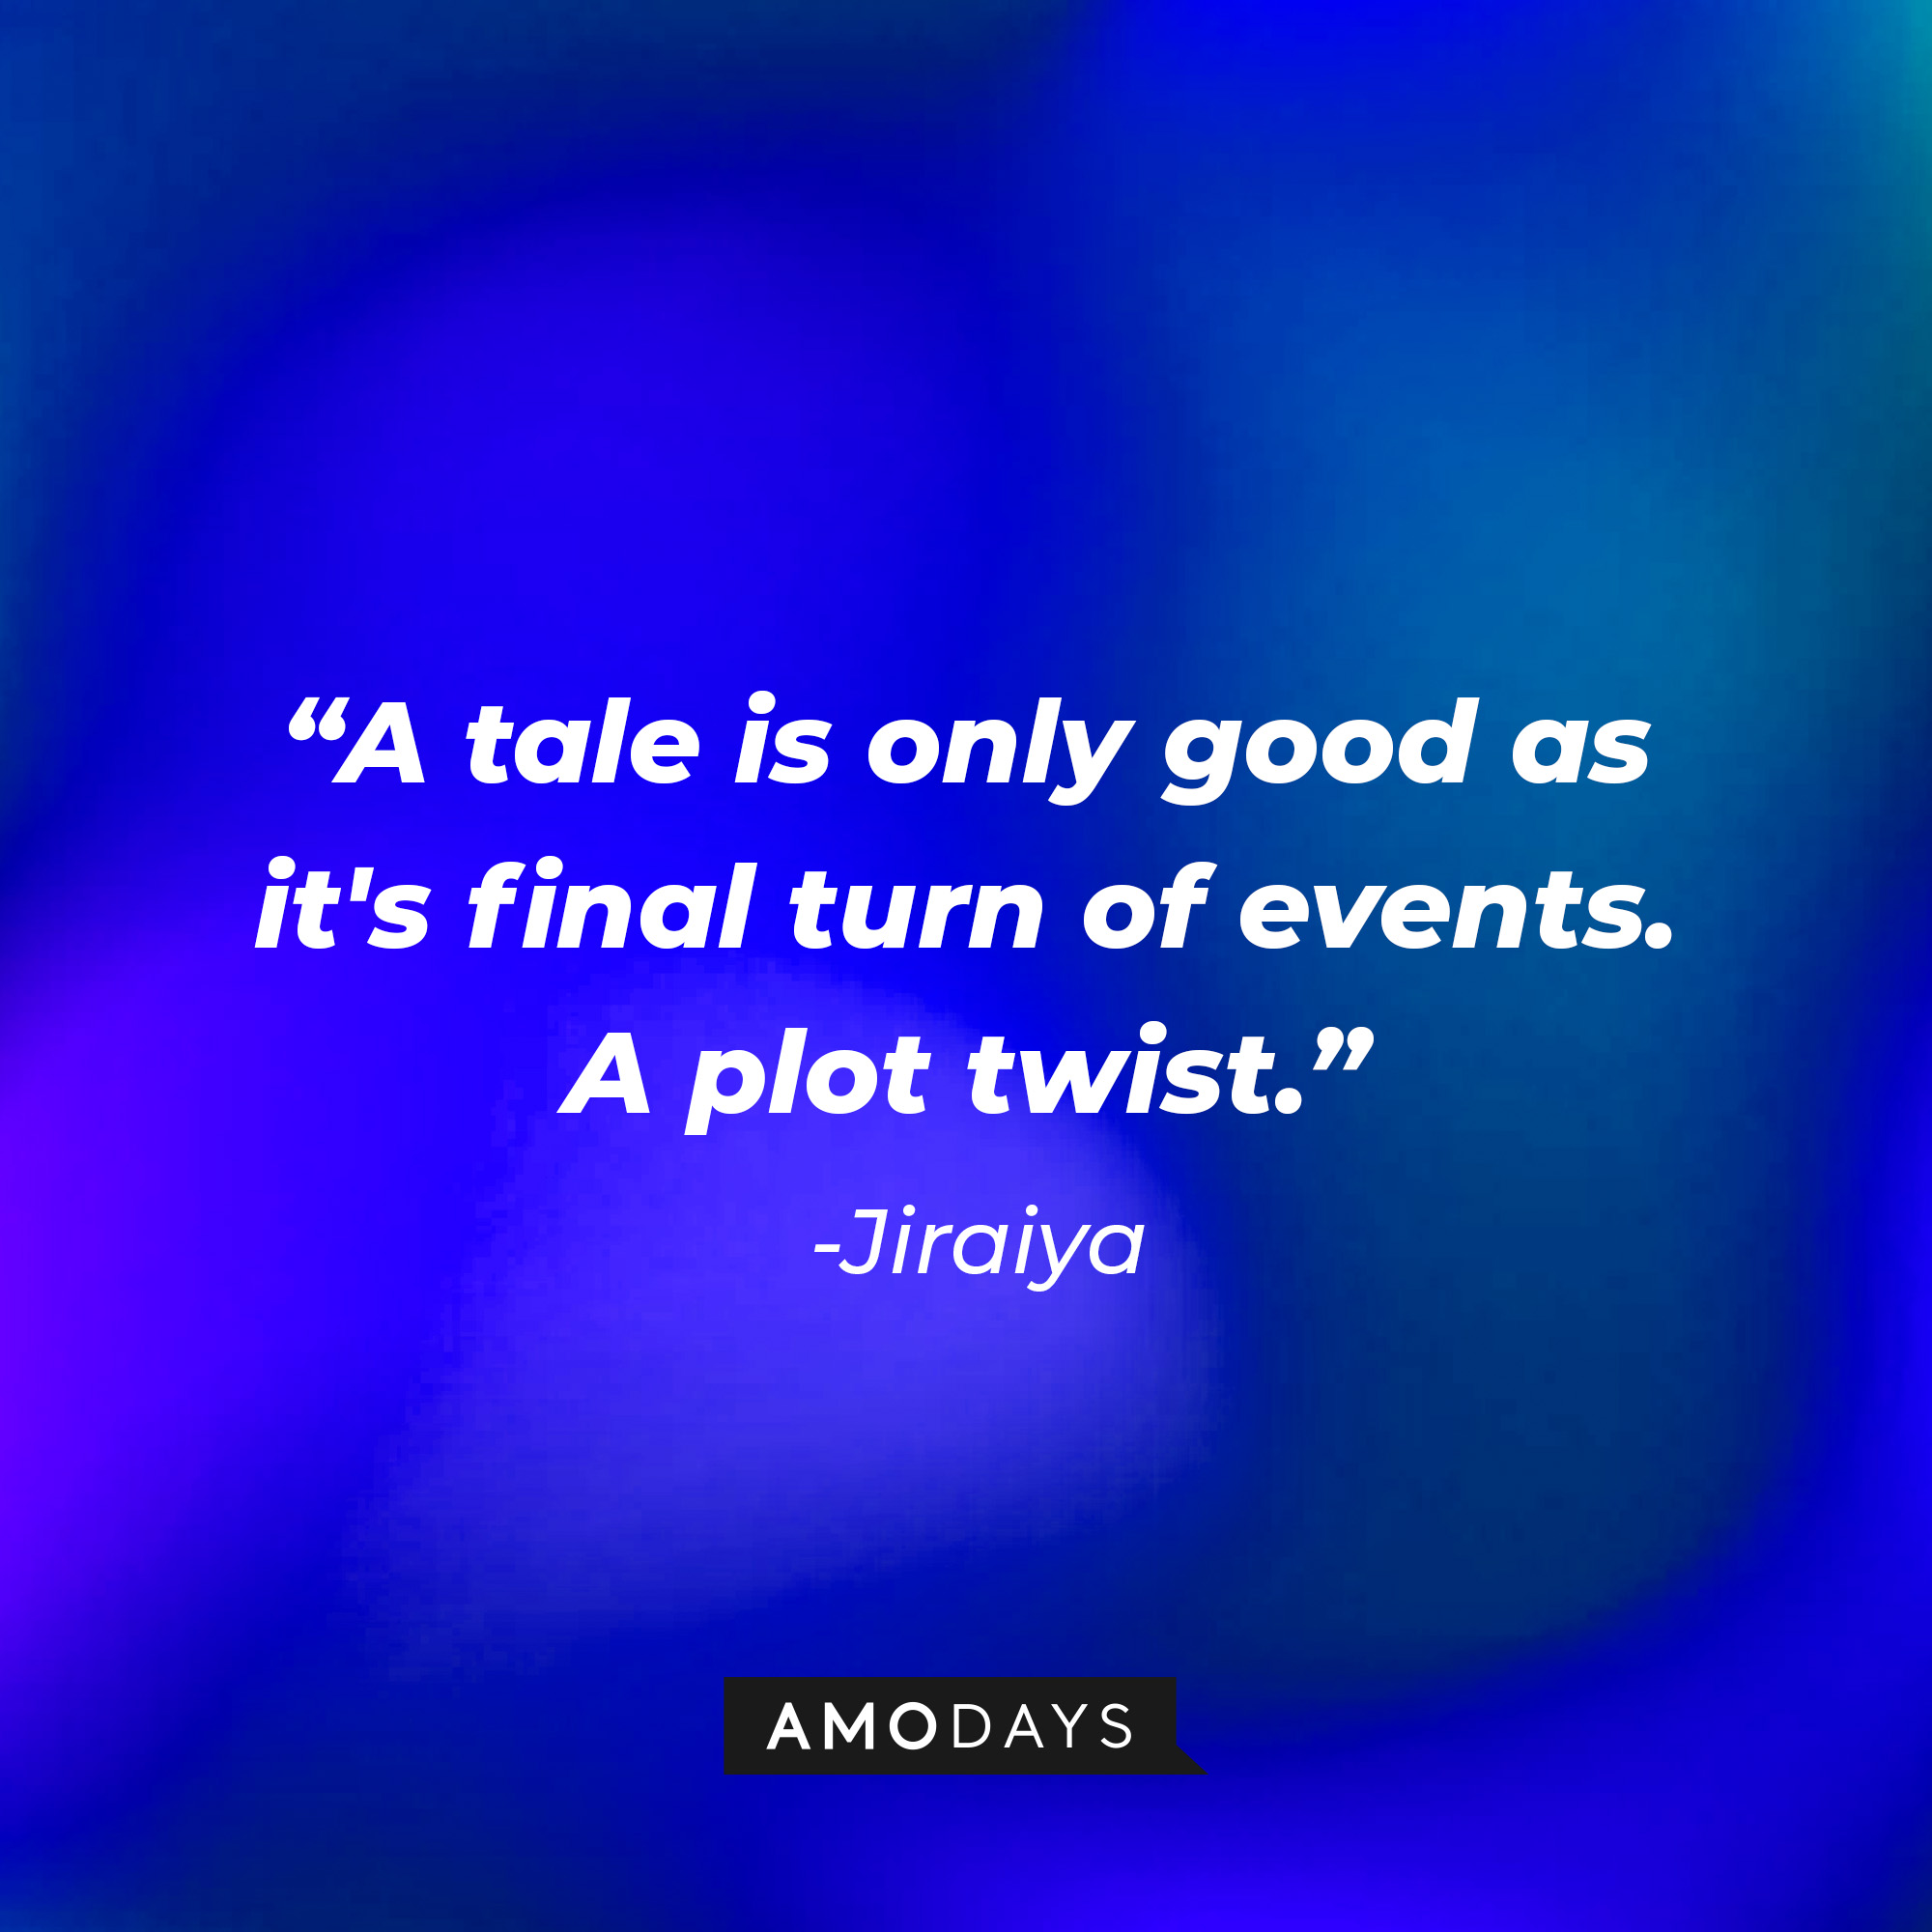 Jiraiya’s quote: "A tale is only good as it's final turn of events. A plot twist.” │ Source: AmoDays